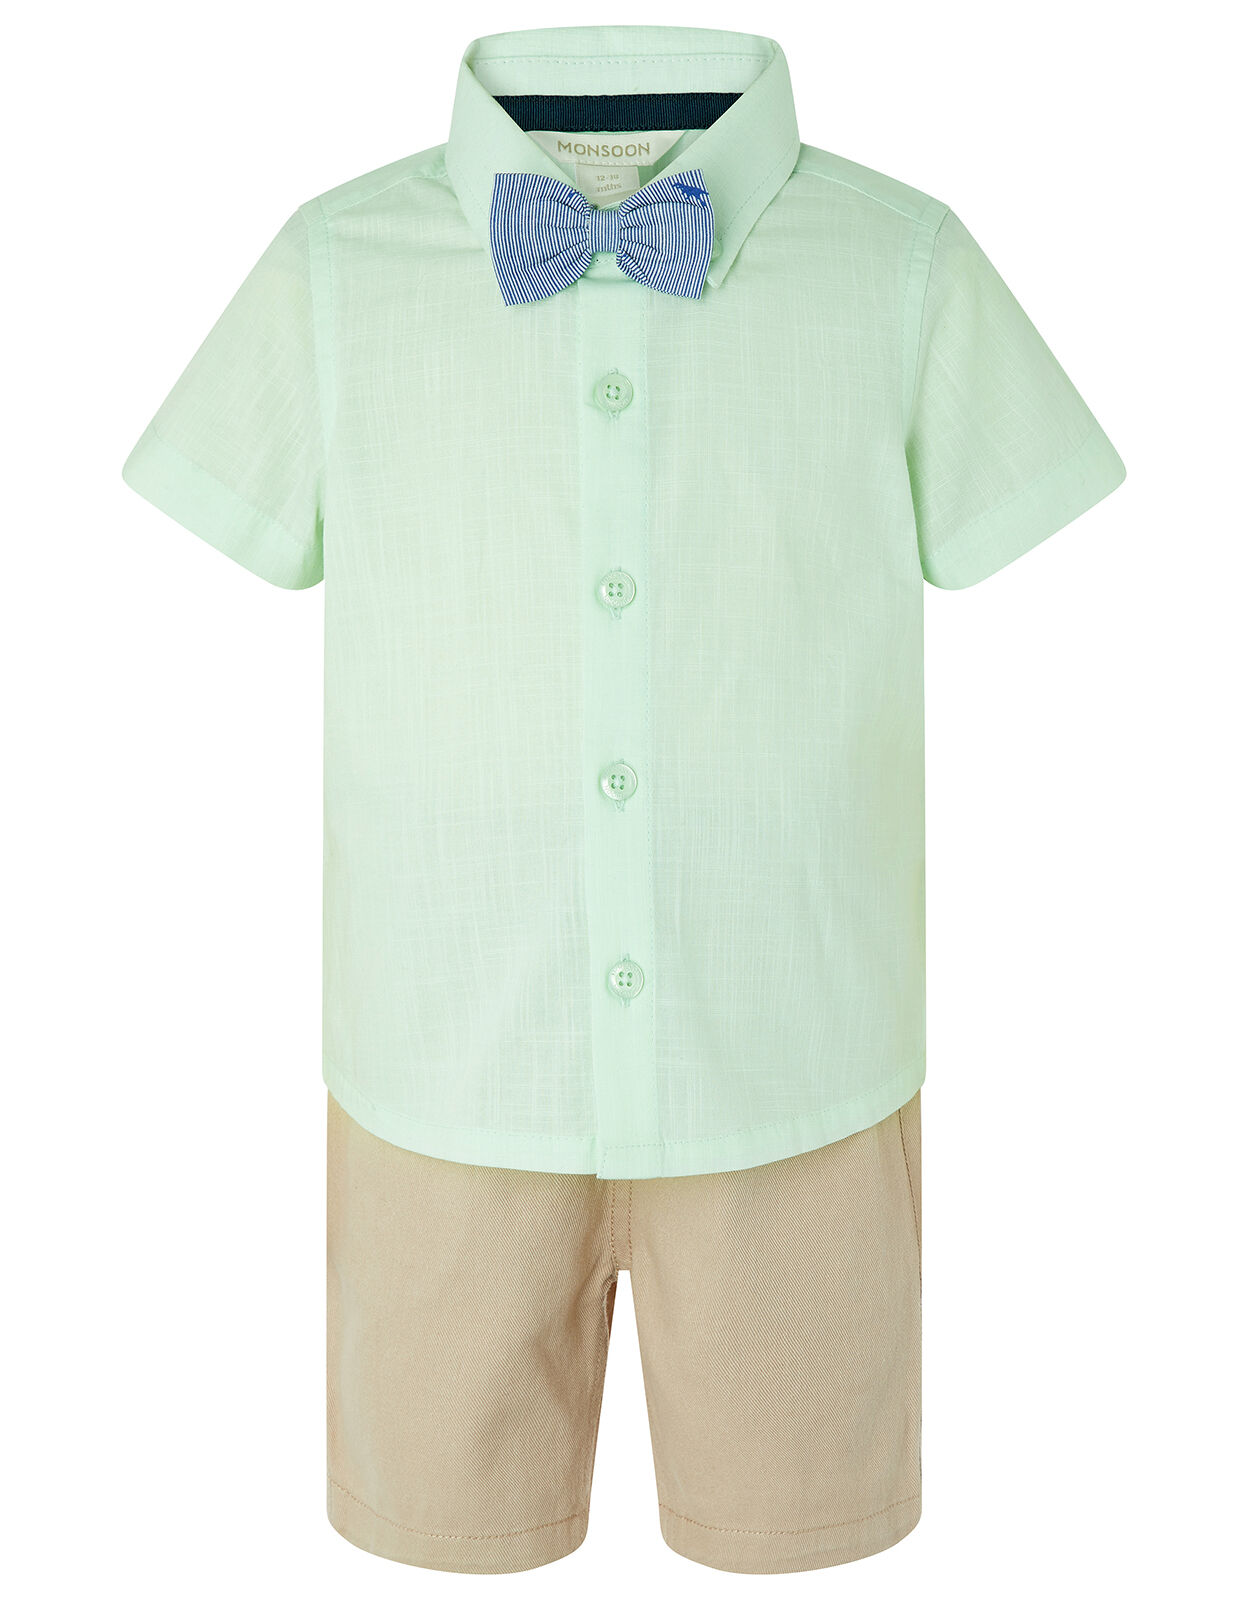 monsoon baby boy clothes